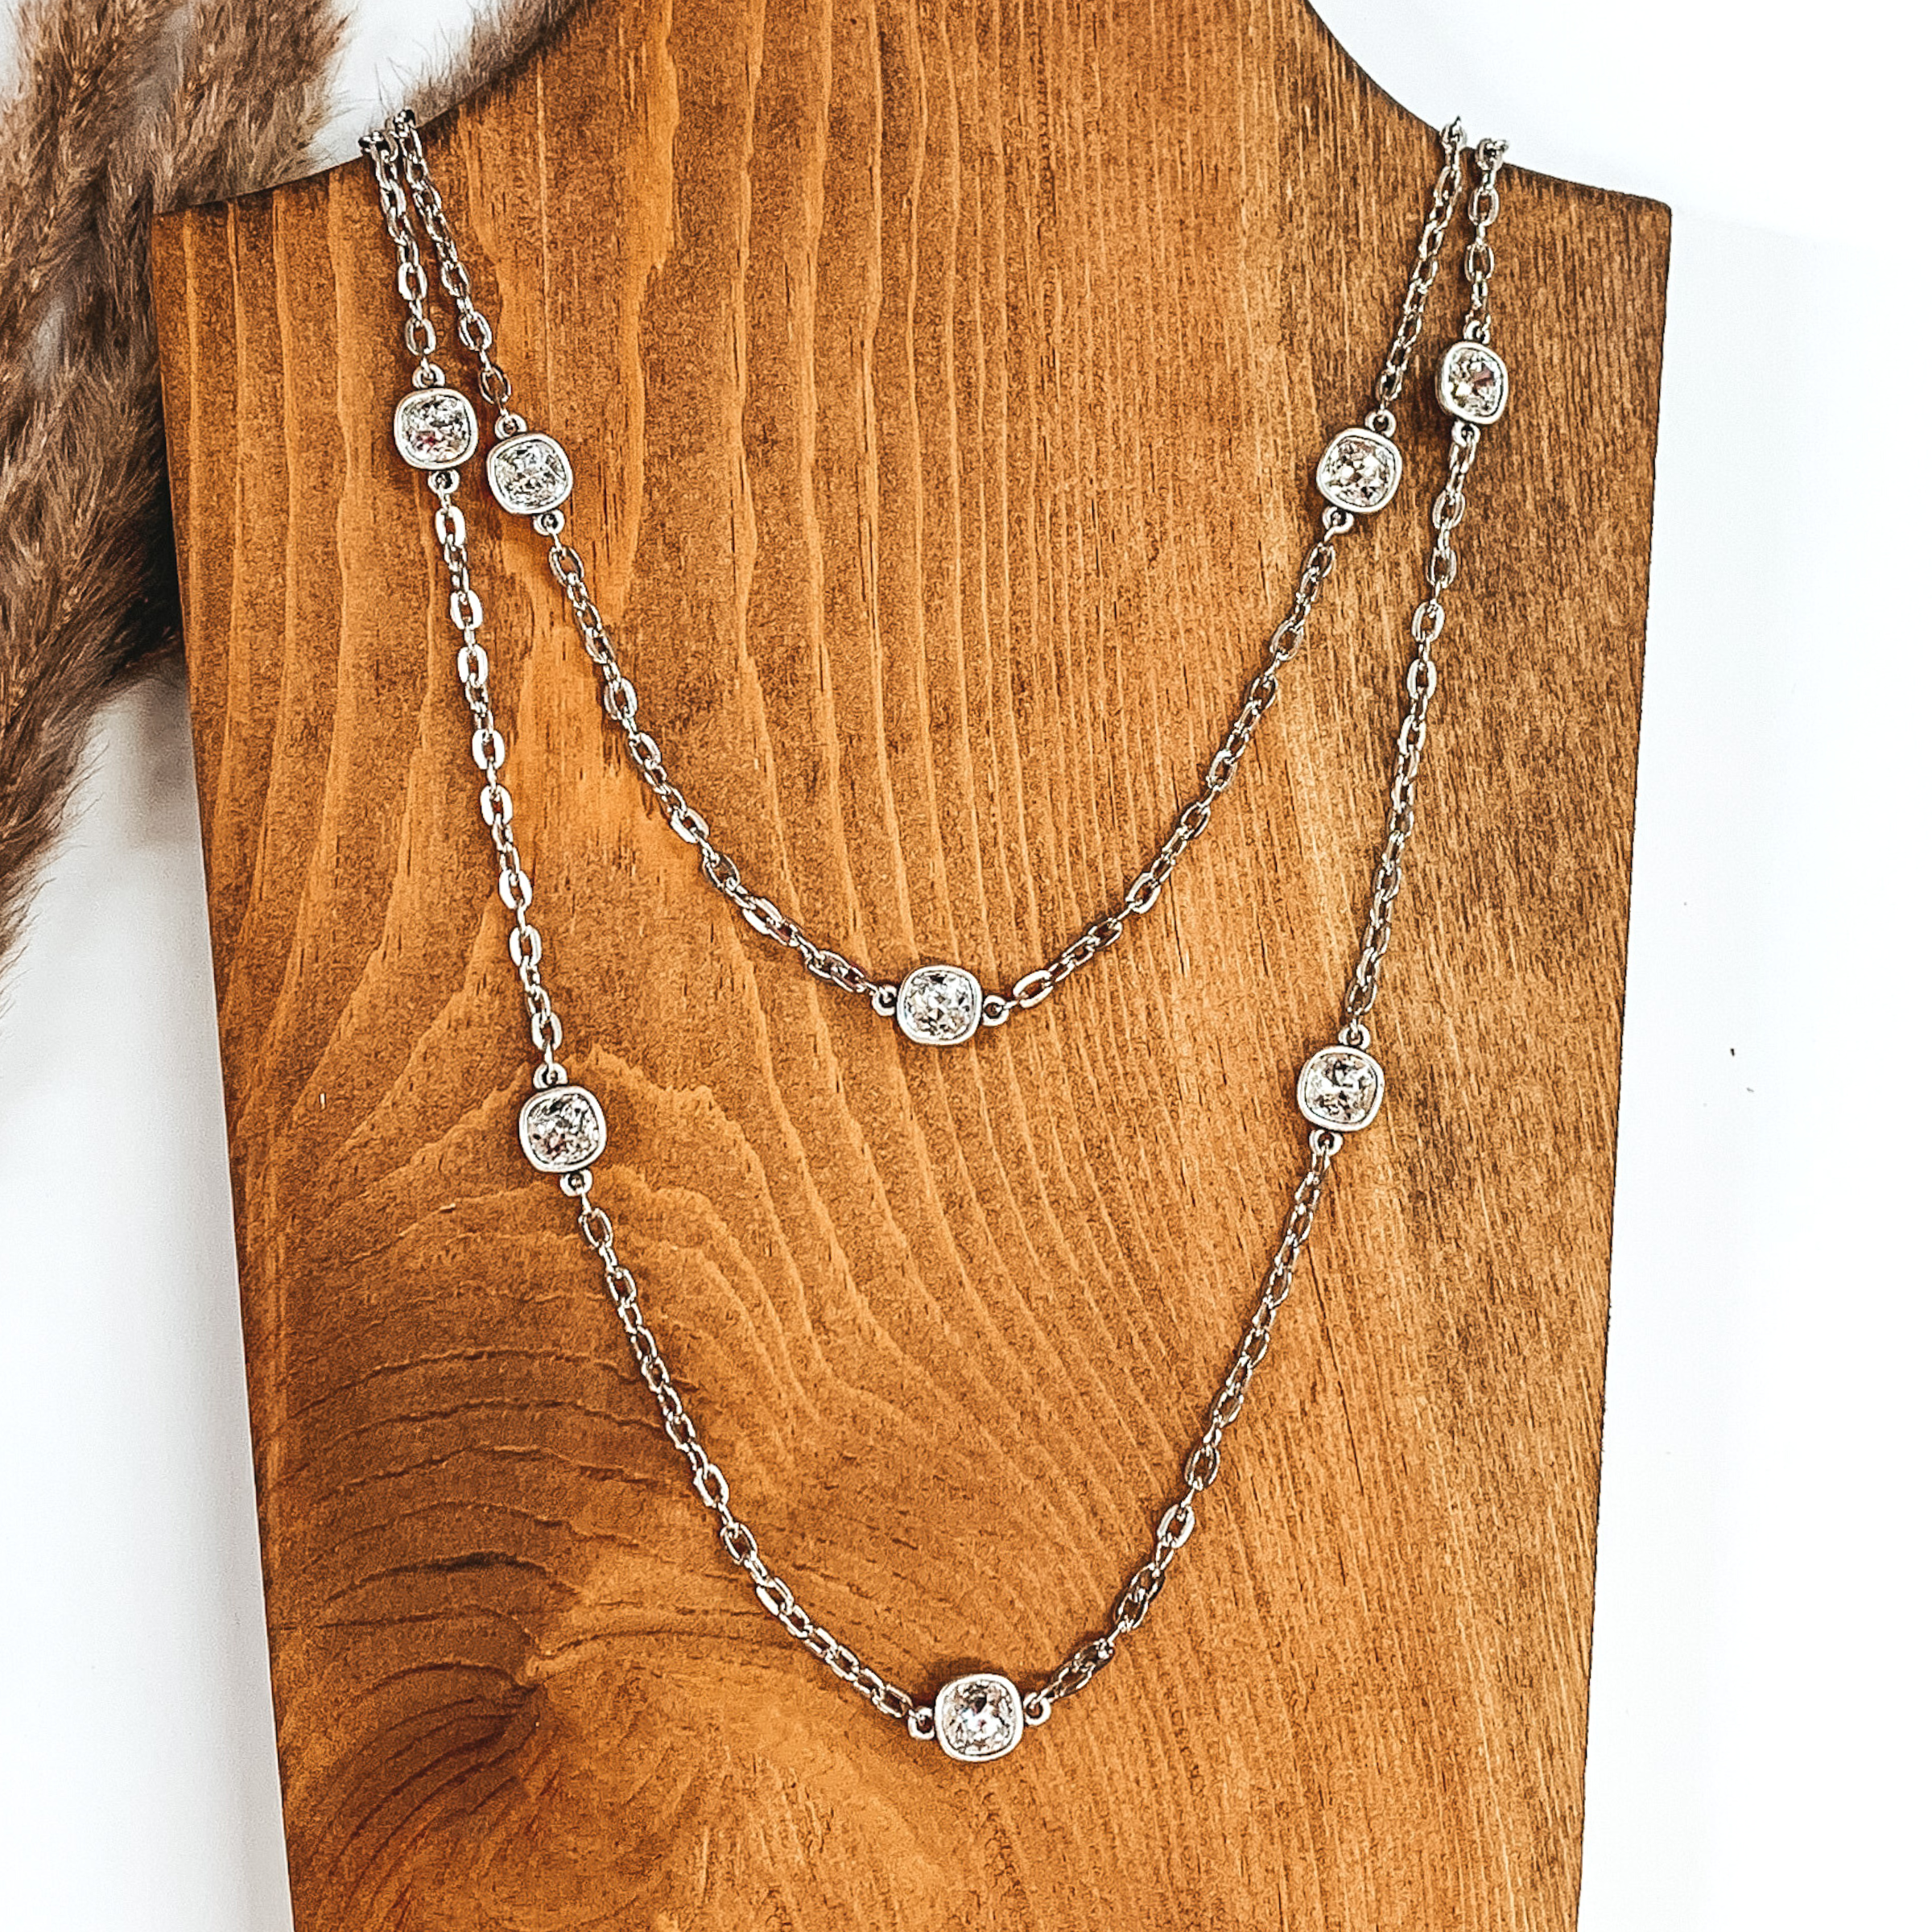 Silver chained necklace with square clear crystal spacers pictured on a wood and white background. 